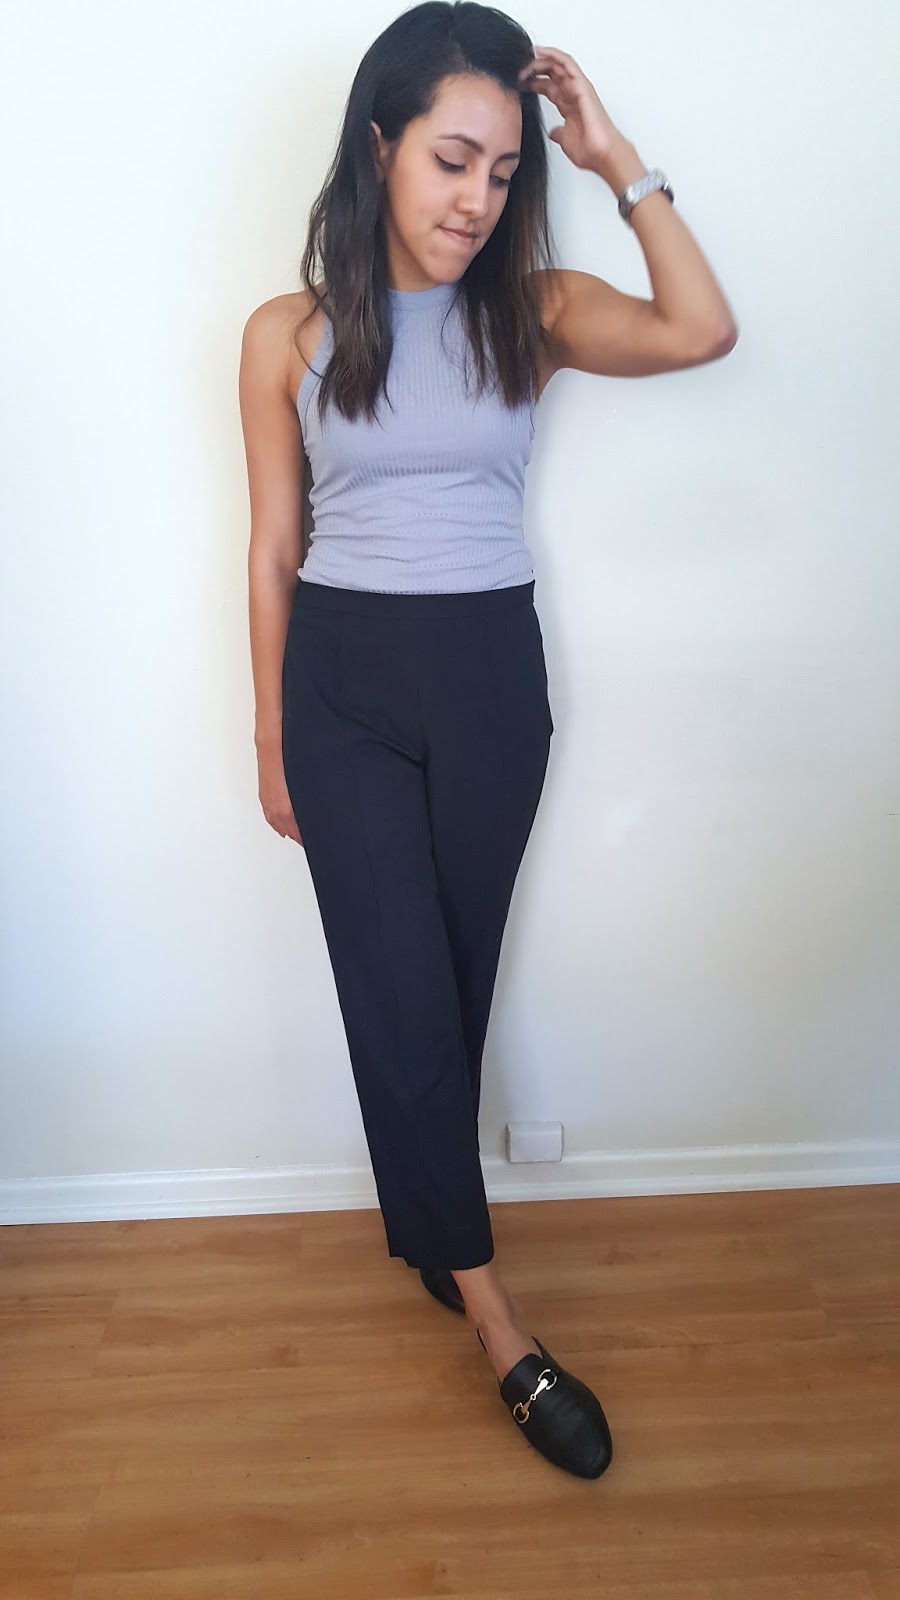 Fiercely Petite: Stitched Crease Pants- Finding my Work Style